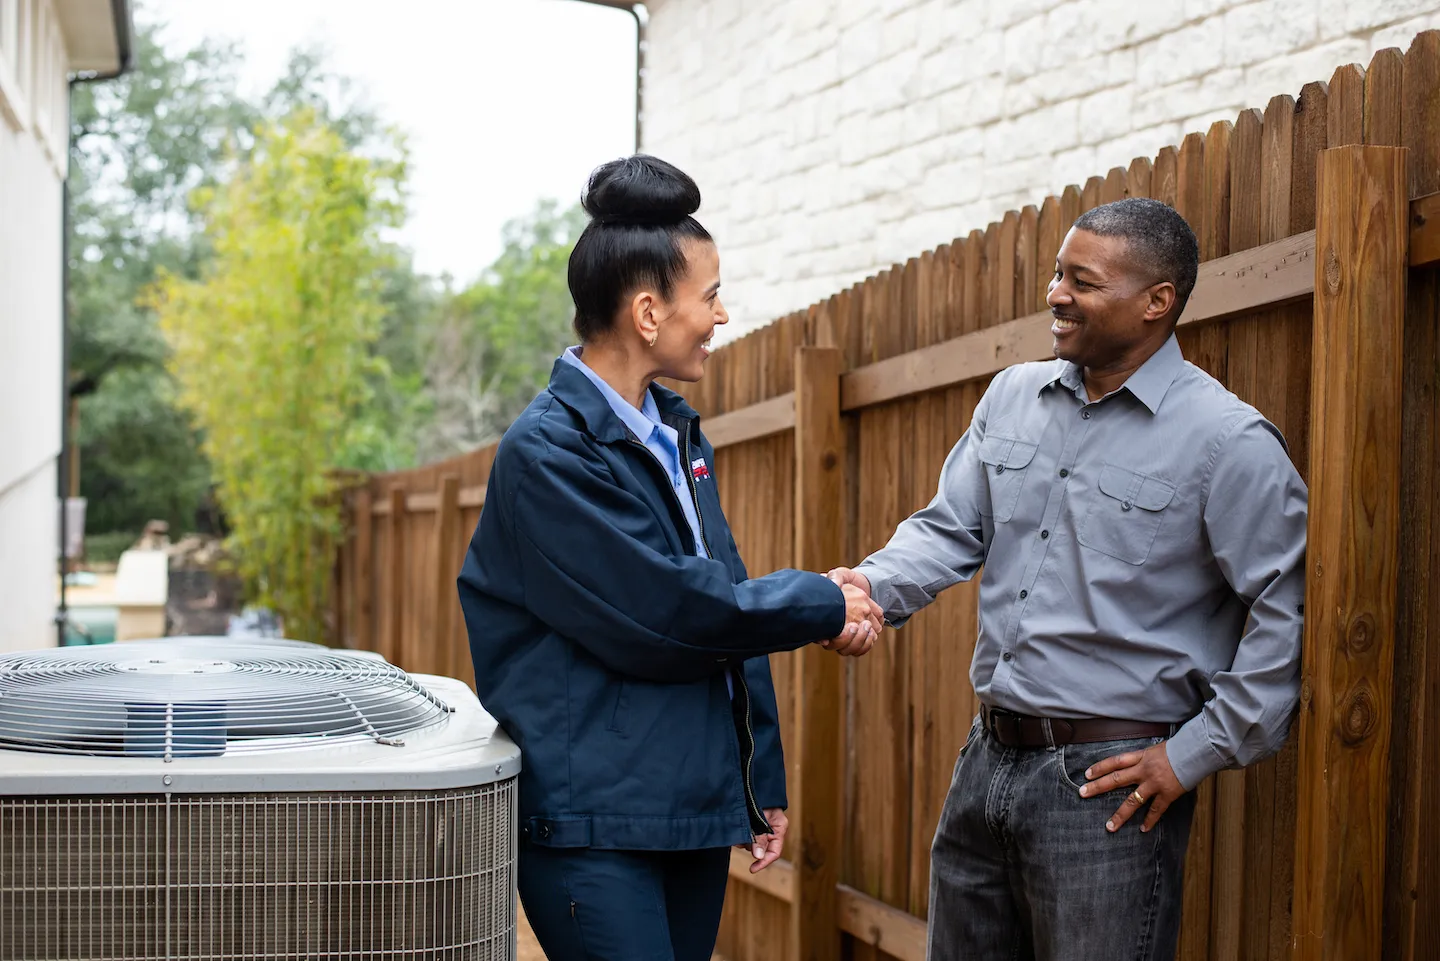 Upgrading Your HVAC System: Spring Specials and Cost-Saving Benefits